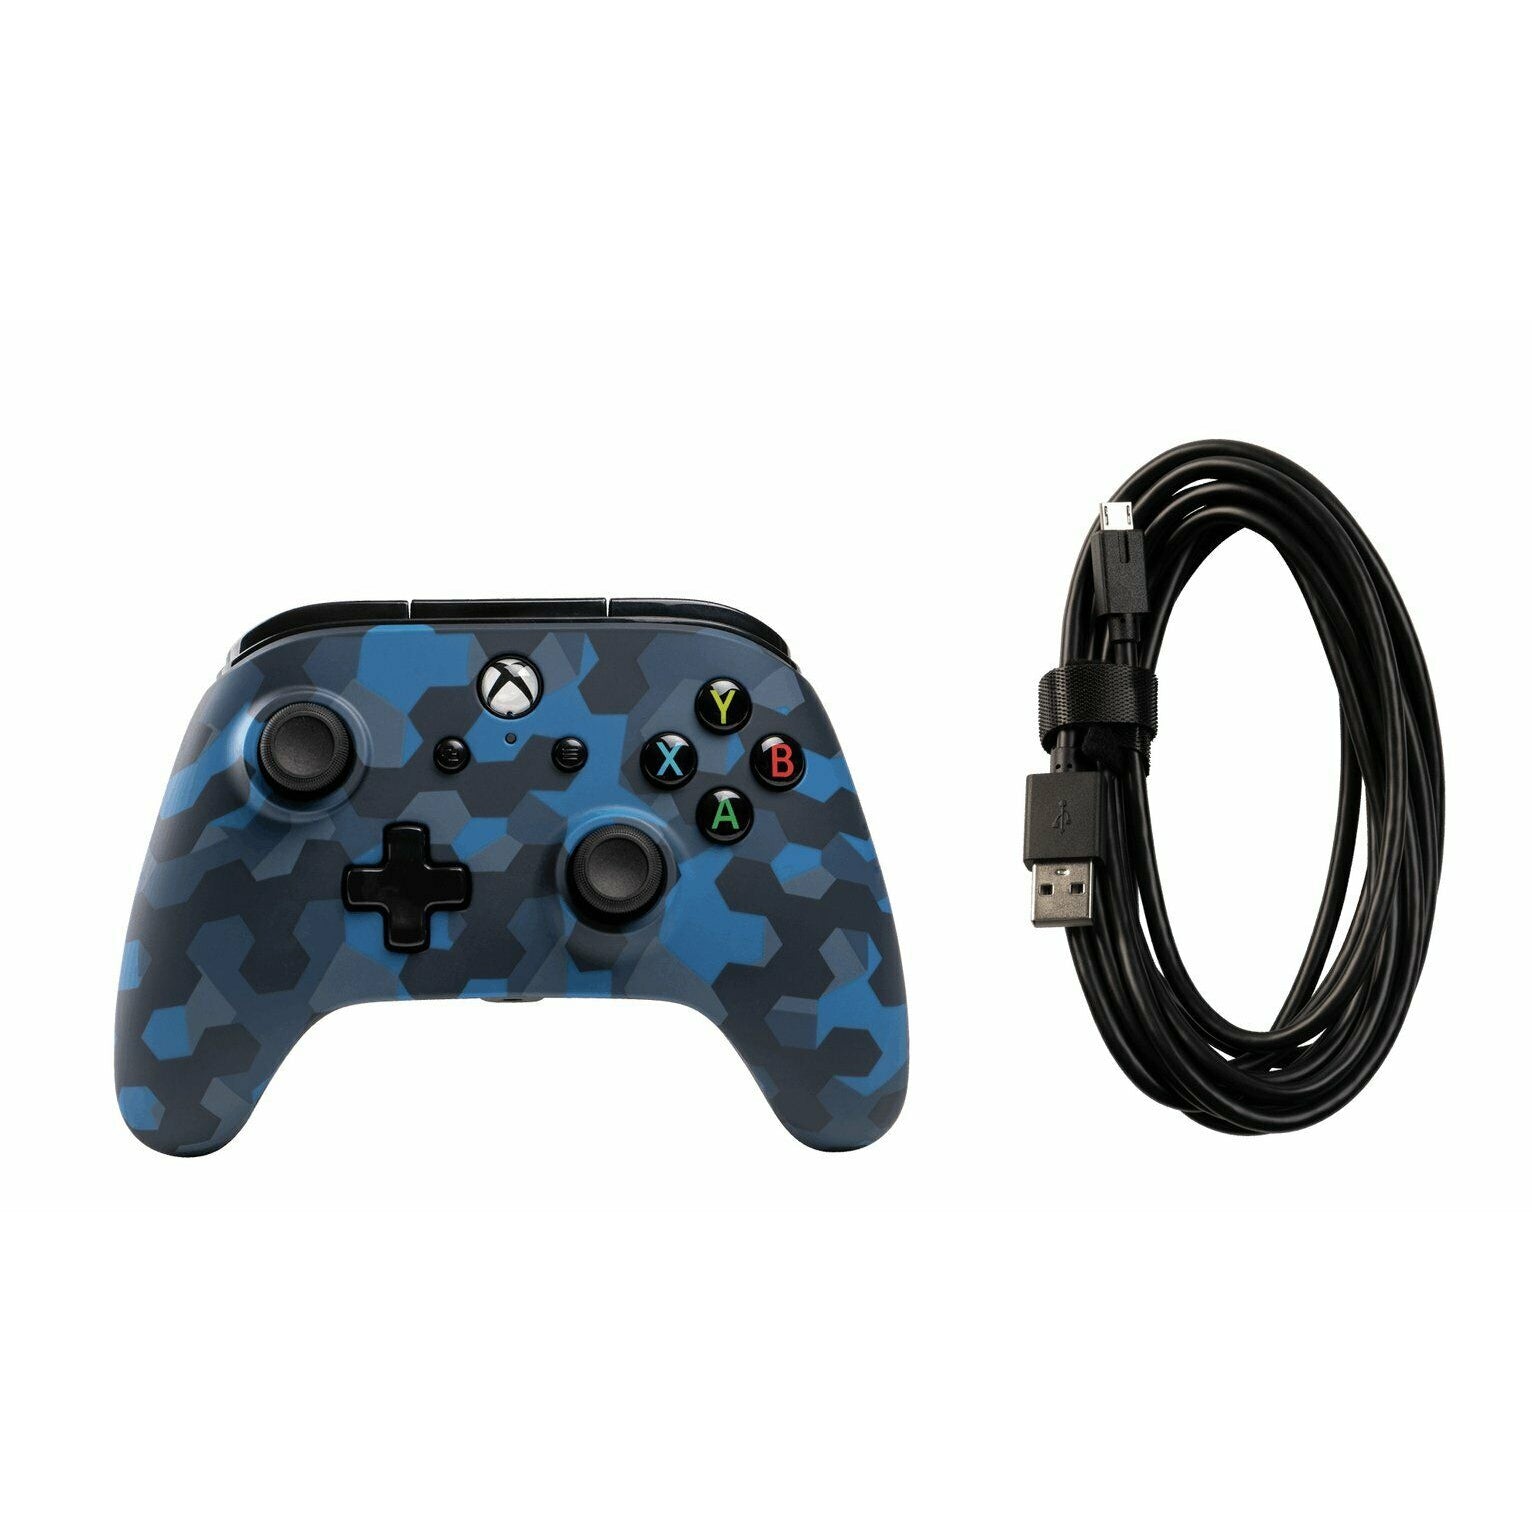 PowerA Microsoft Xbox One Wired Controller - Stealth Blue Camo